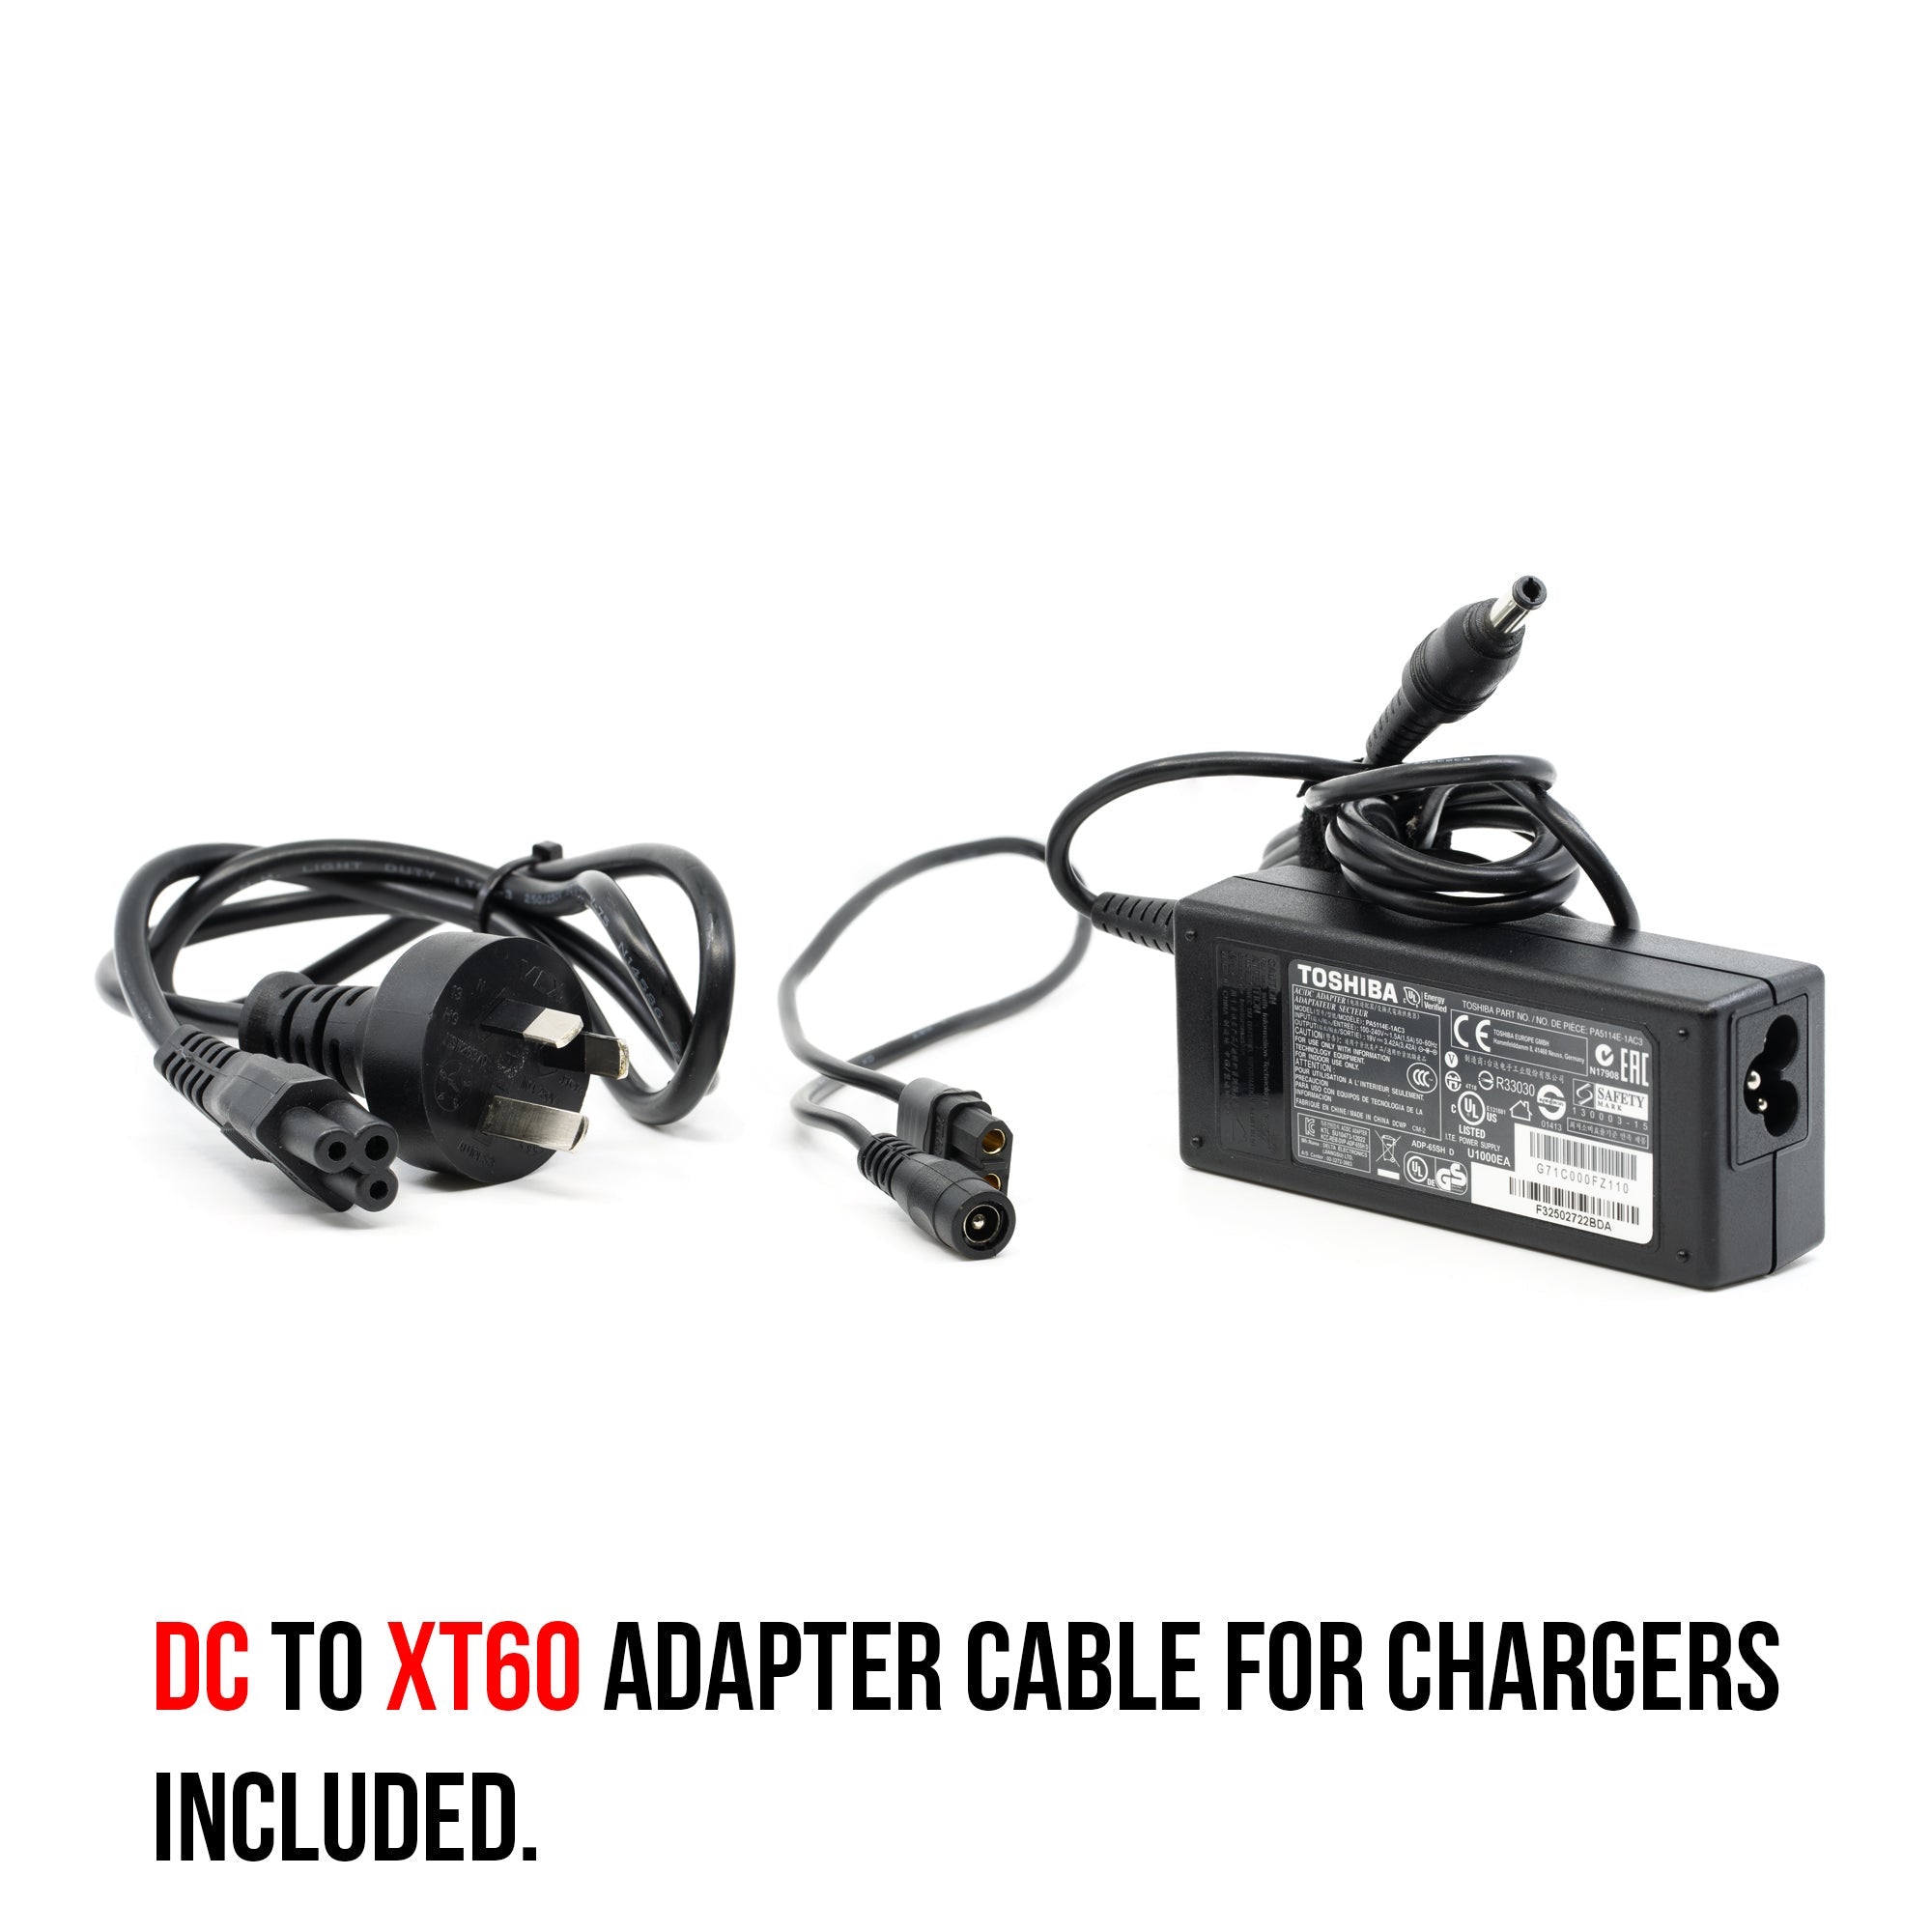 AC to DC 19v 4.74A 90W Refurbished Power Supply for Lipo Chargers with XT60 Cable Adapter